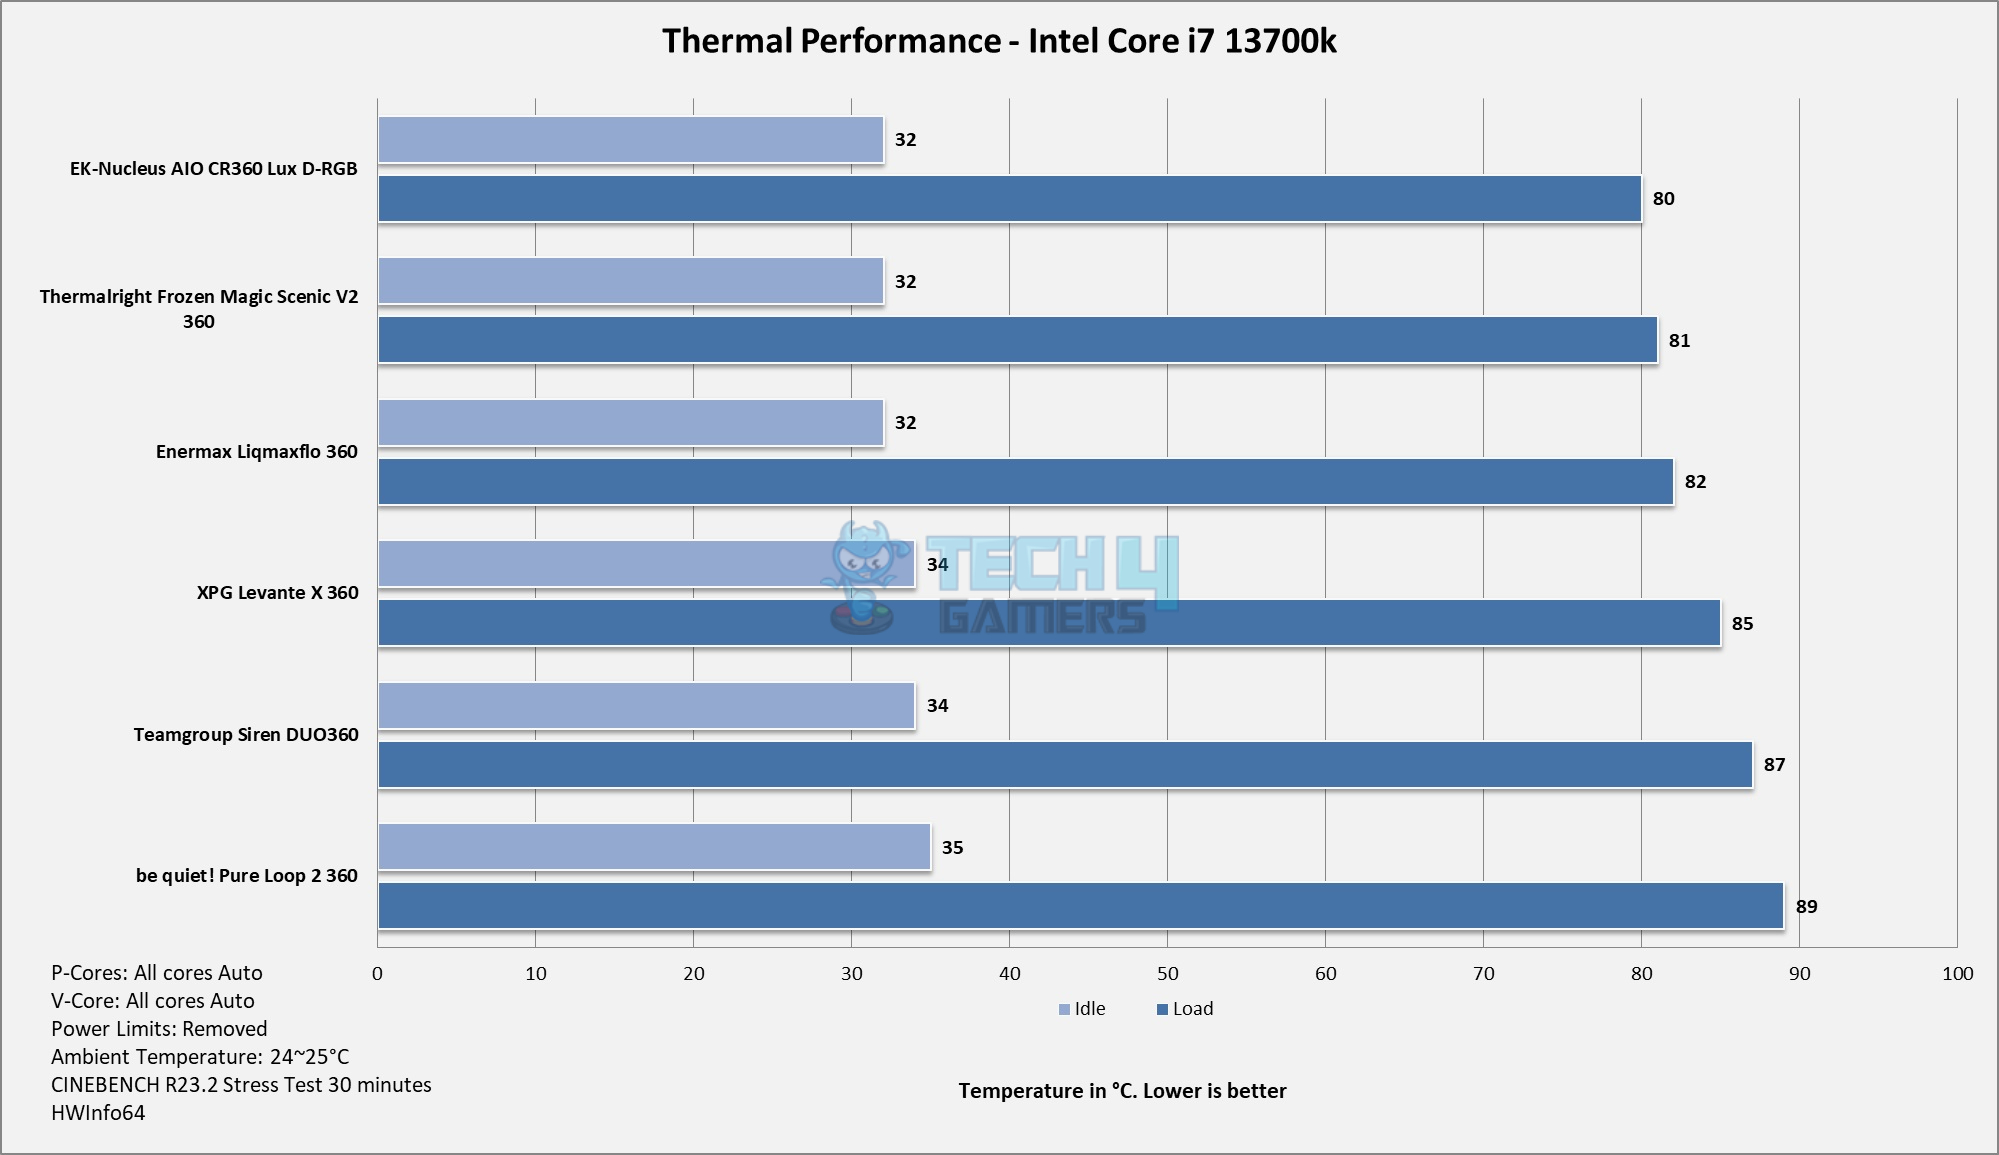 be quiet! Pure Loop 2 360 — Thermal Performance